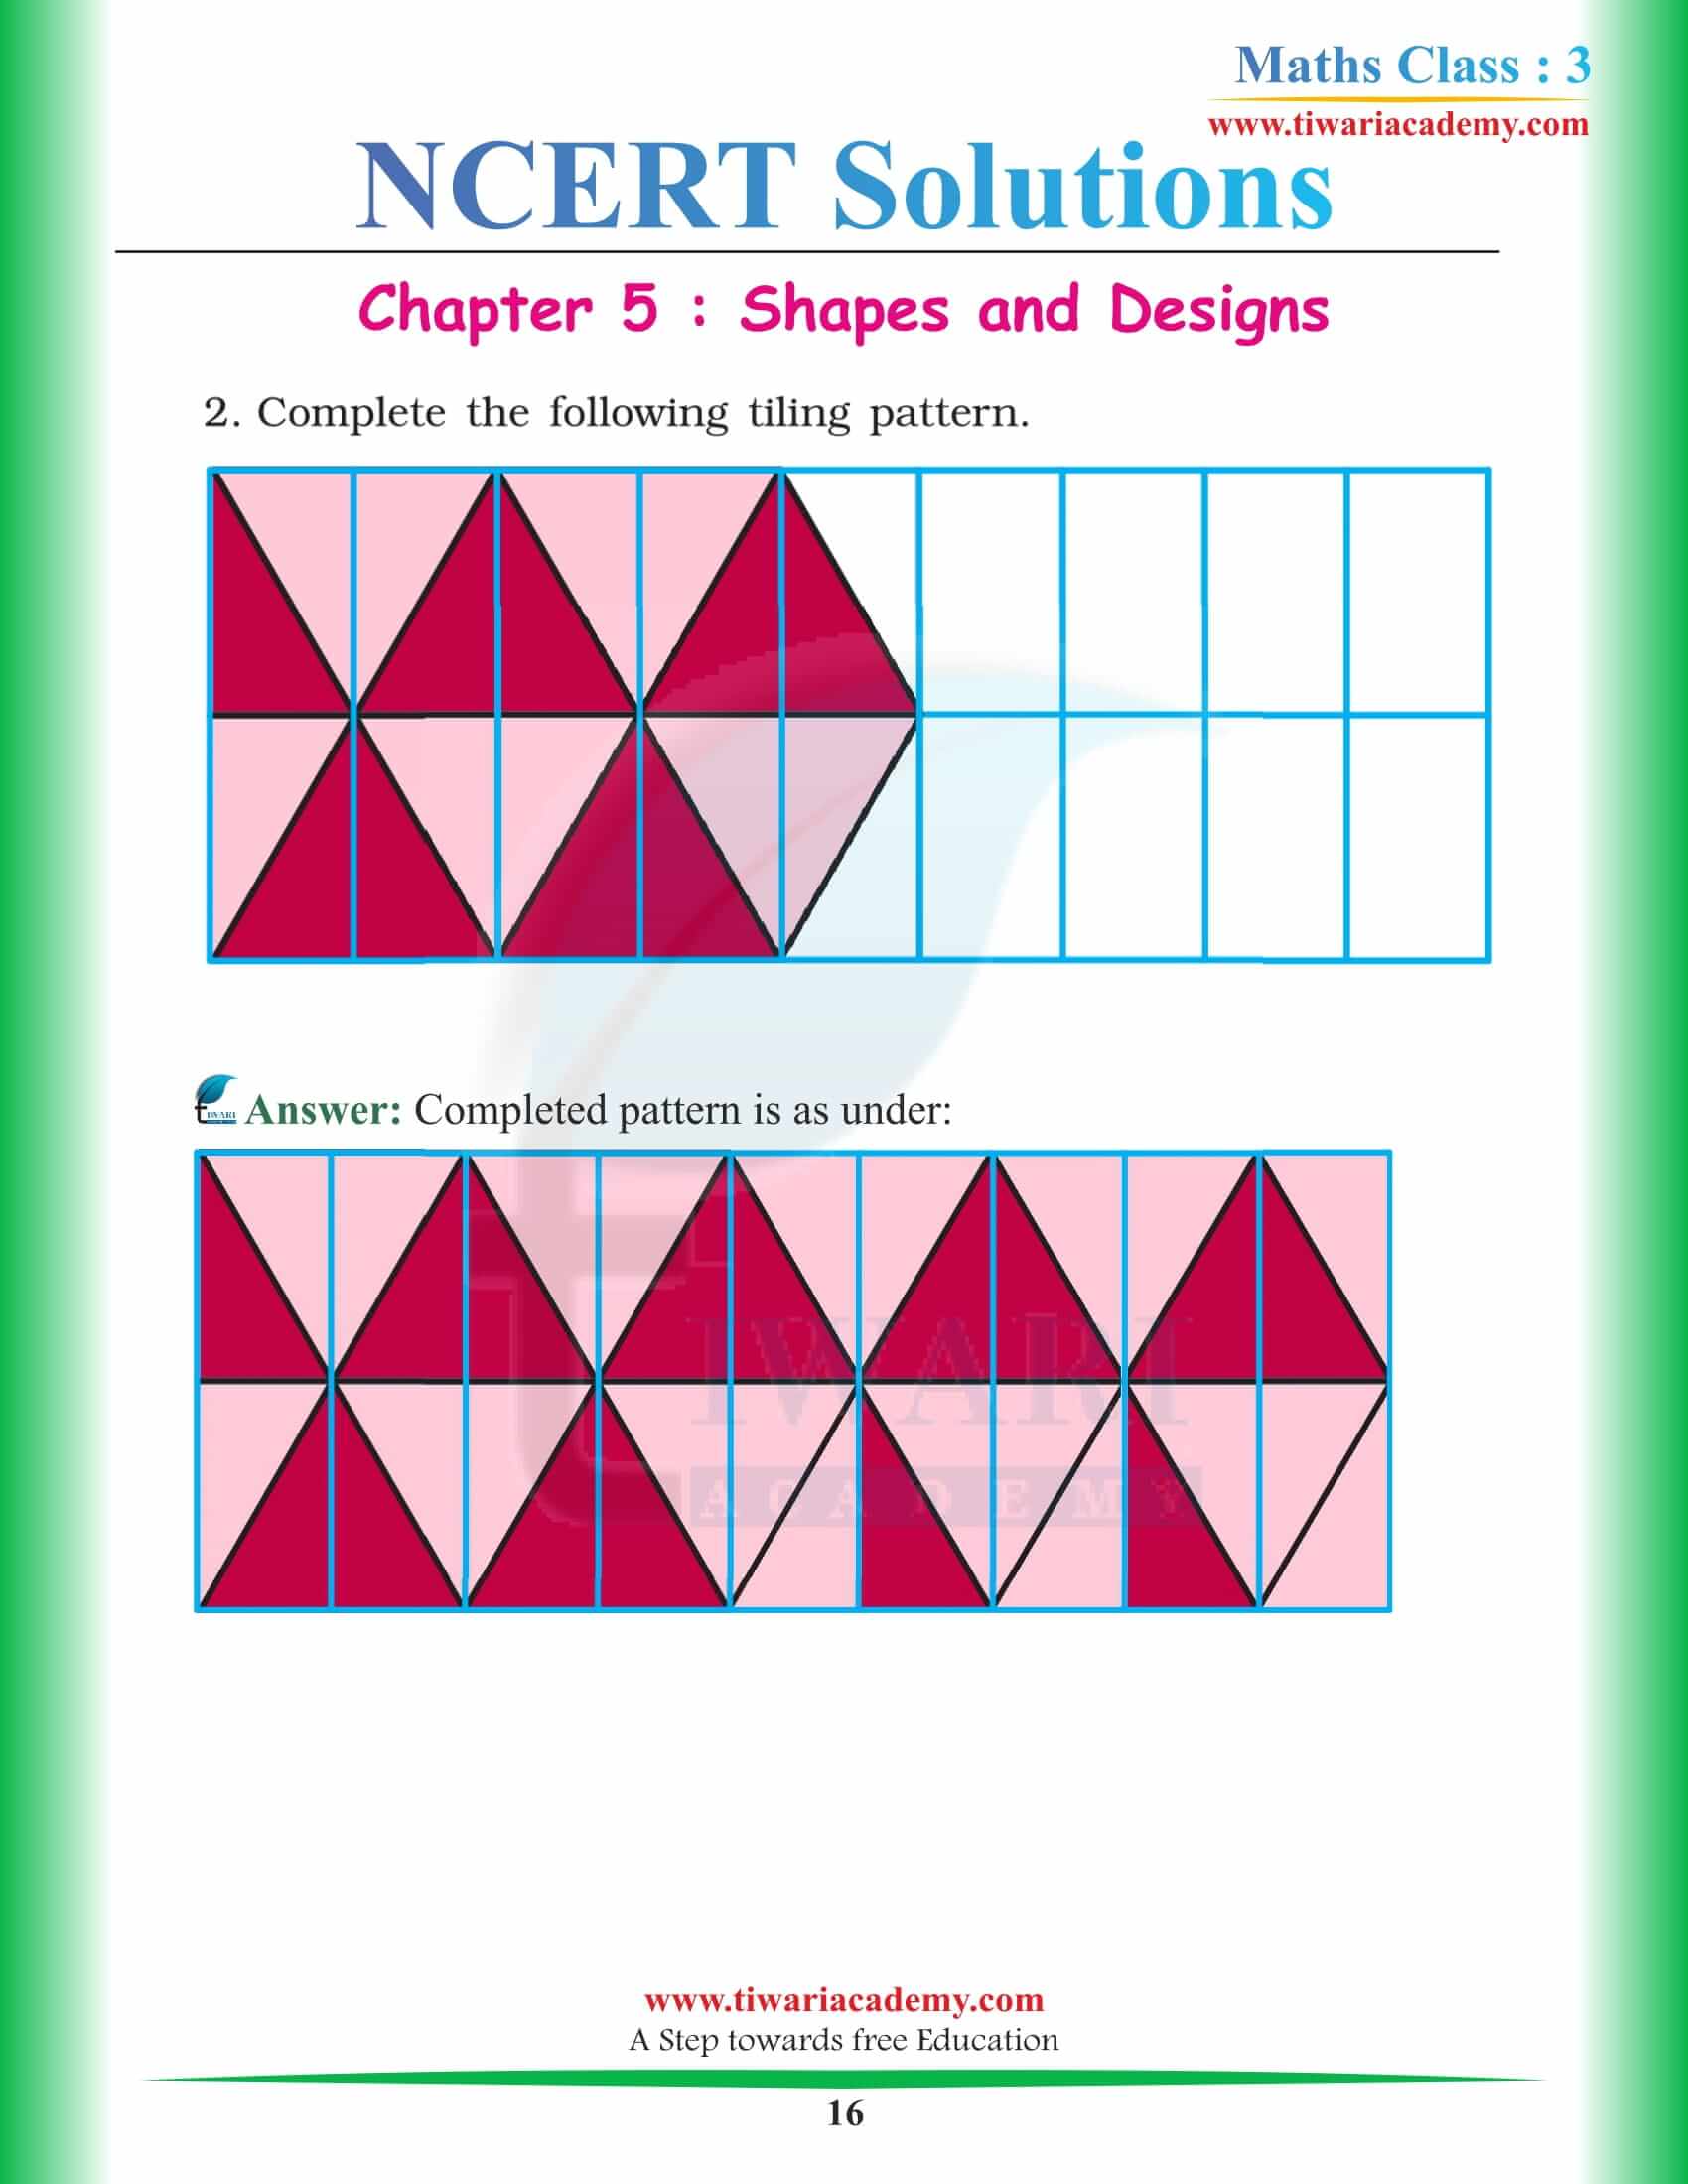 Grade 3 Maths NCERT Chapter 5 answers in English